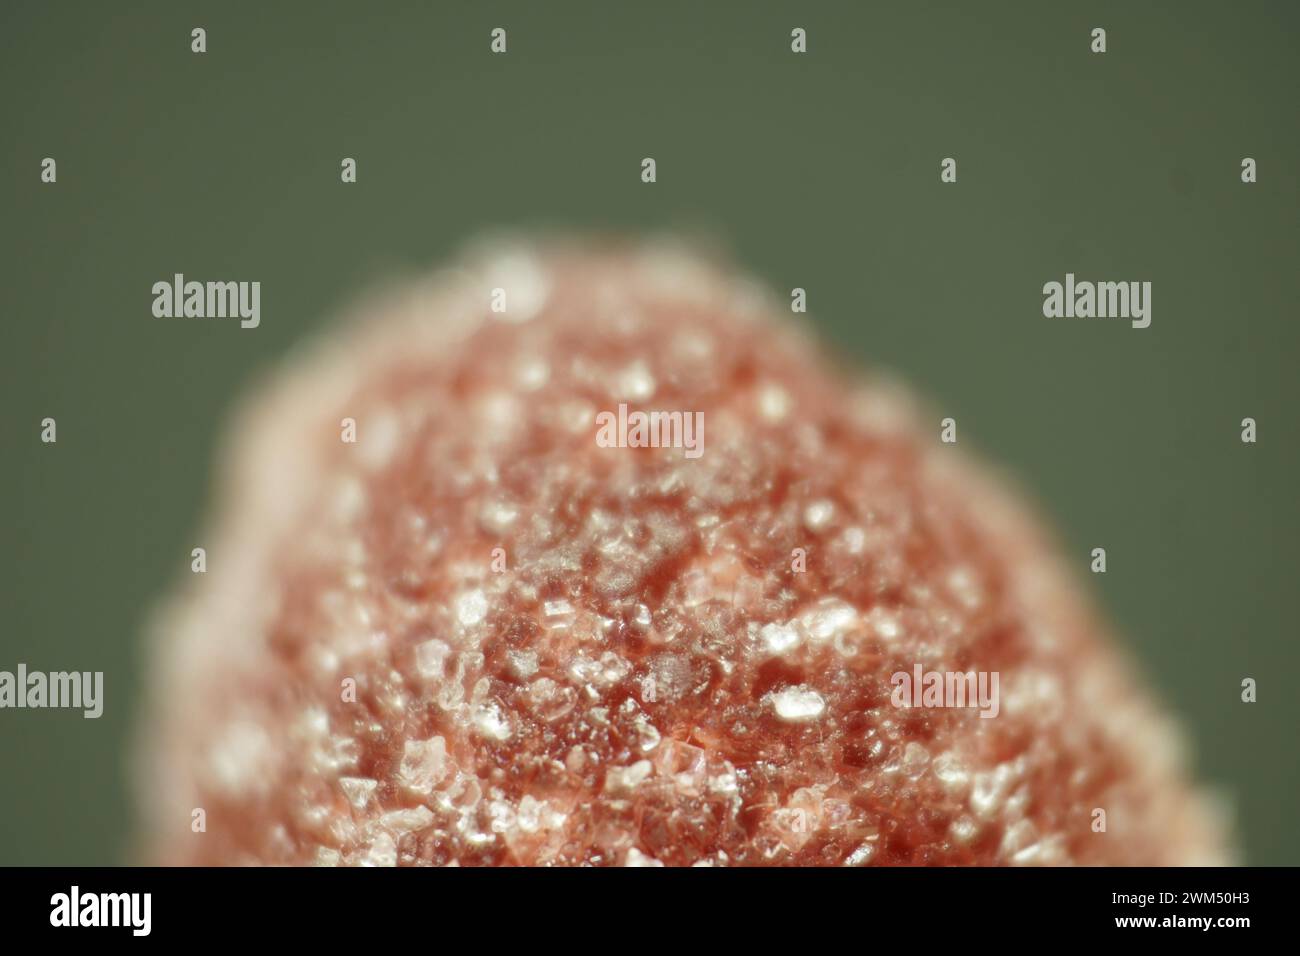 Close-up view of Sugar crystals sprinkled on red gumdrop jelly soft candy in selective focus isolated on dark green background Stock Photo